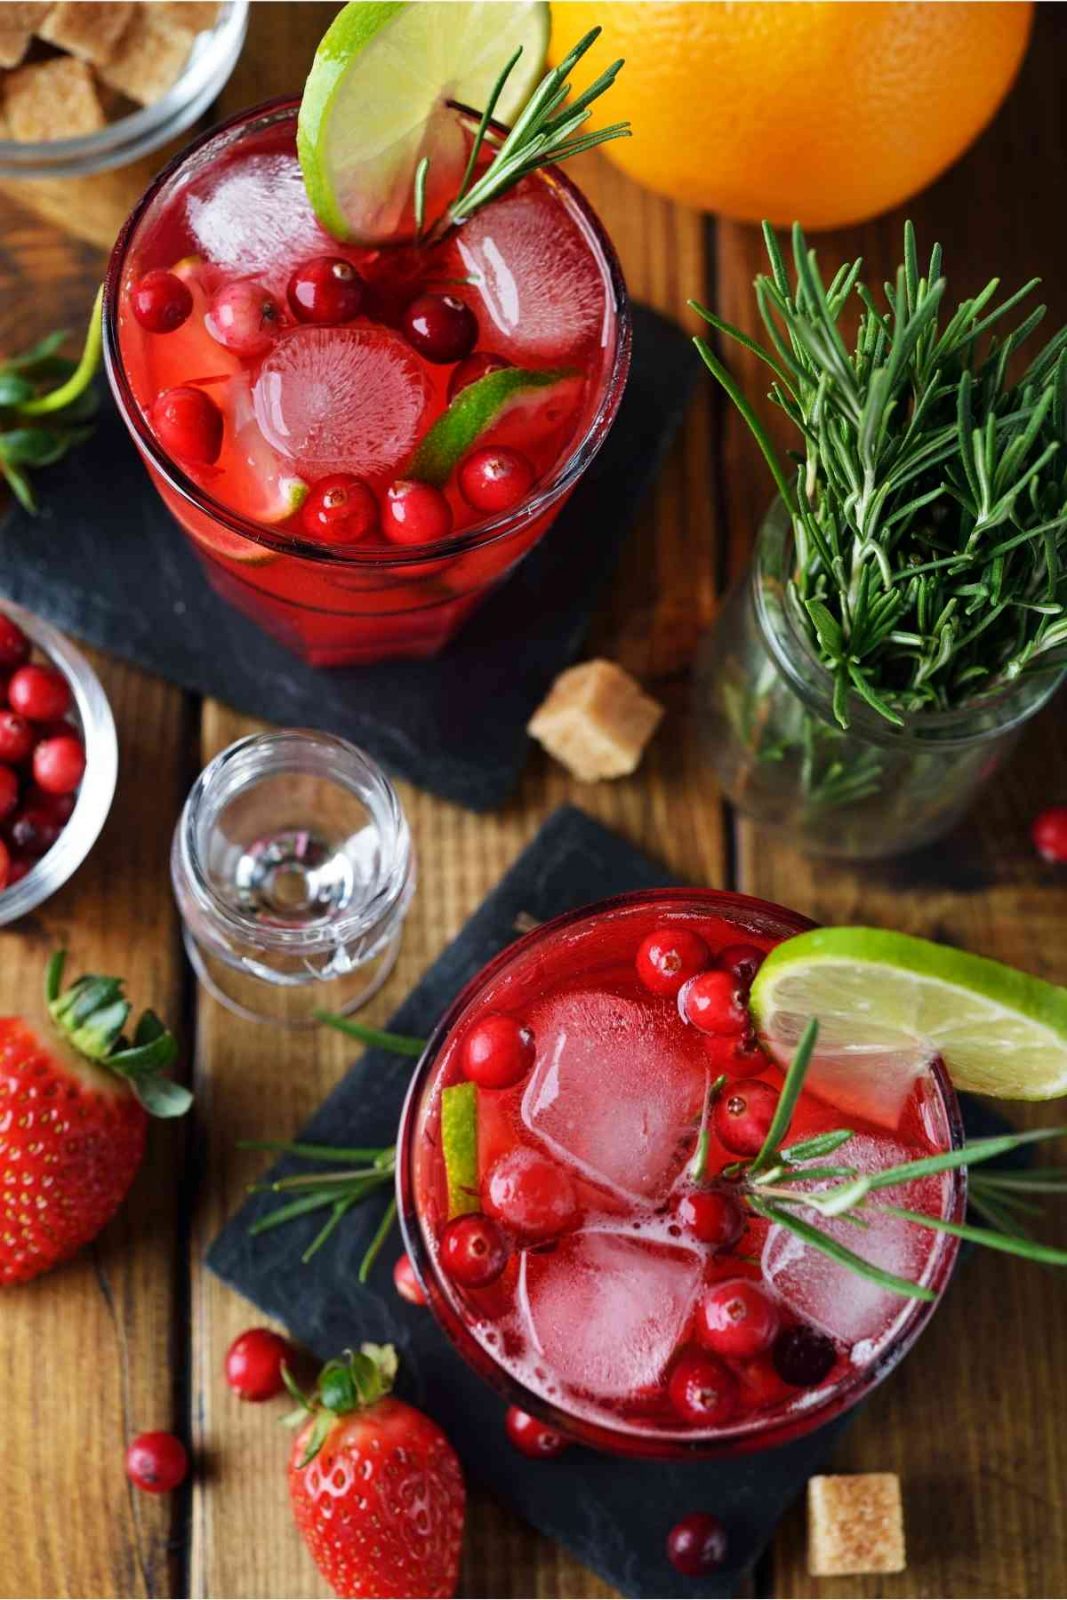 The thing we love most about this refreshing cocktail is how versatile it is. It’s perfect for cooling down on a hot summer’s day, but it’s also a holiday-friendly drink. With an extra kick of lime flavor combined with a tart cranberry taste, this drink is fresh, savory, and delicious. You can also add bits of real cranberries and lime wedges to impress your guests.